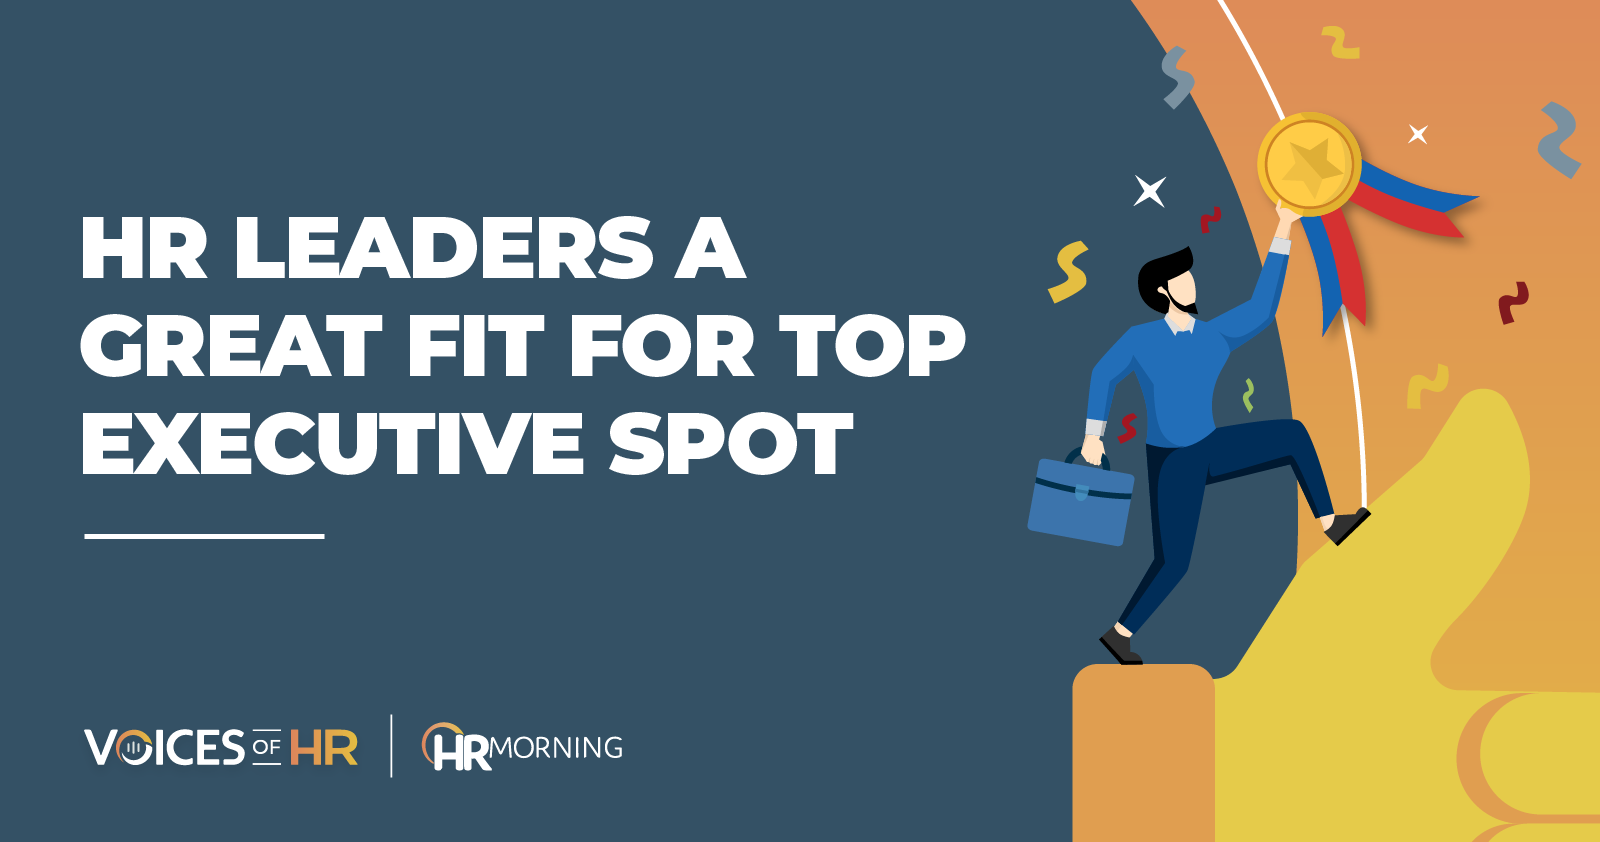 HR leaders a great fit for top executive spot